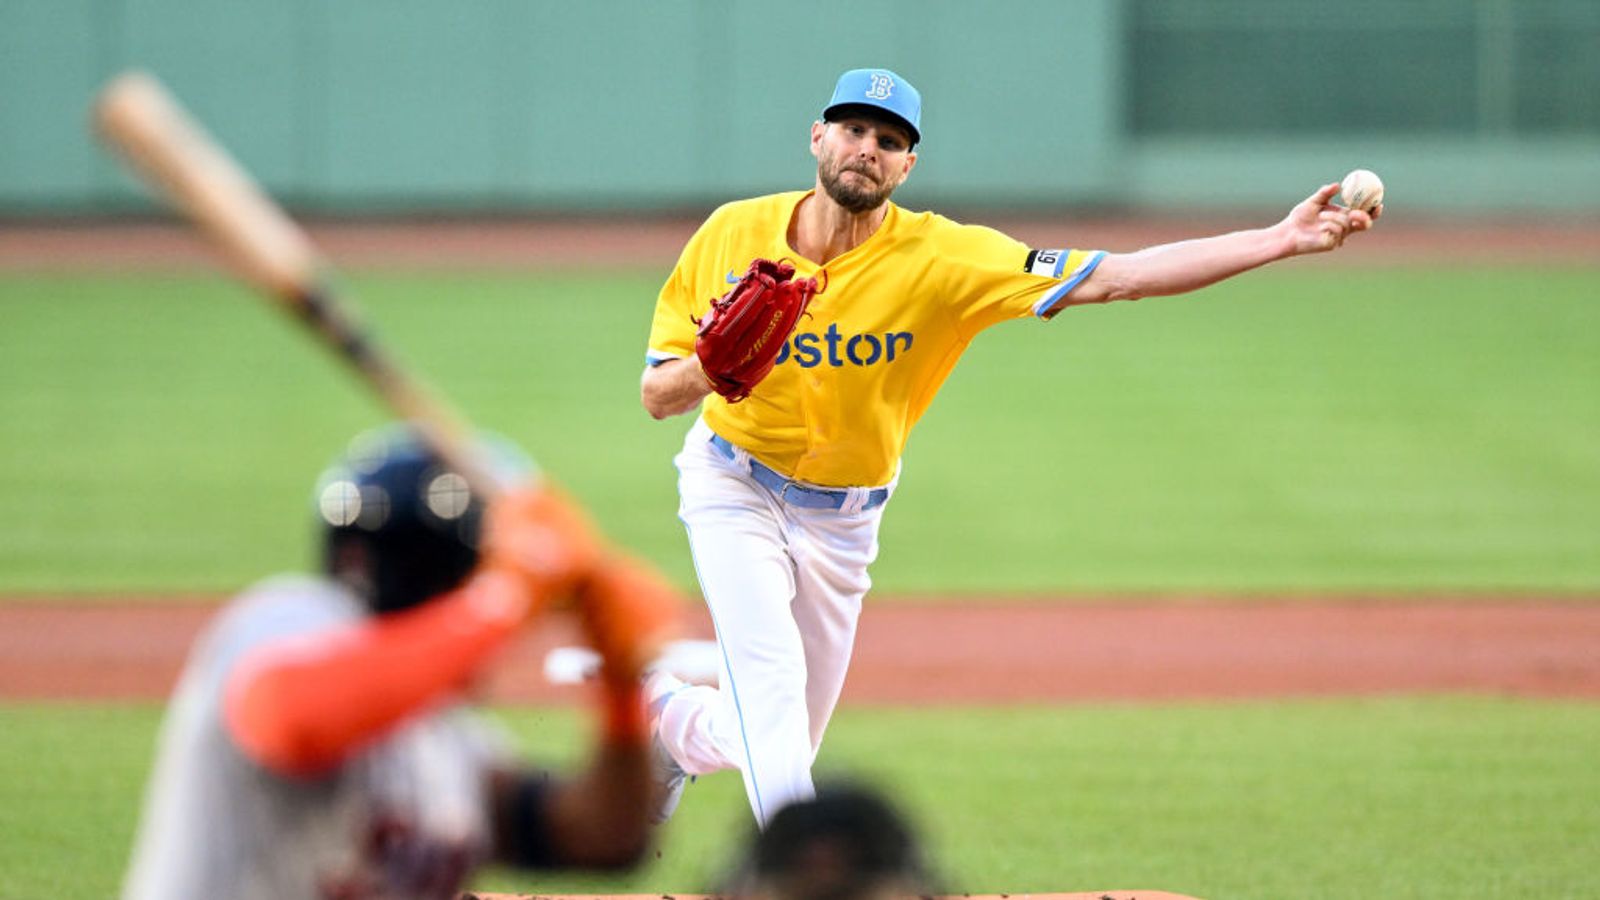 Boston Red Sox yellow and blue uniforms return ahead of 'special